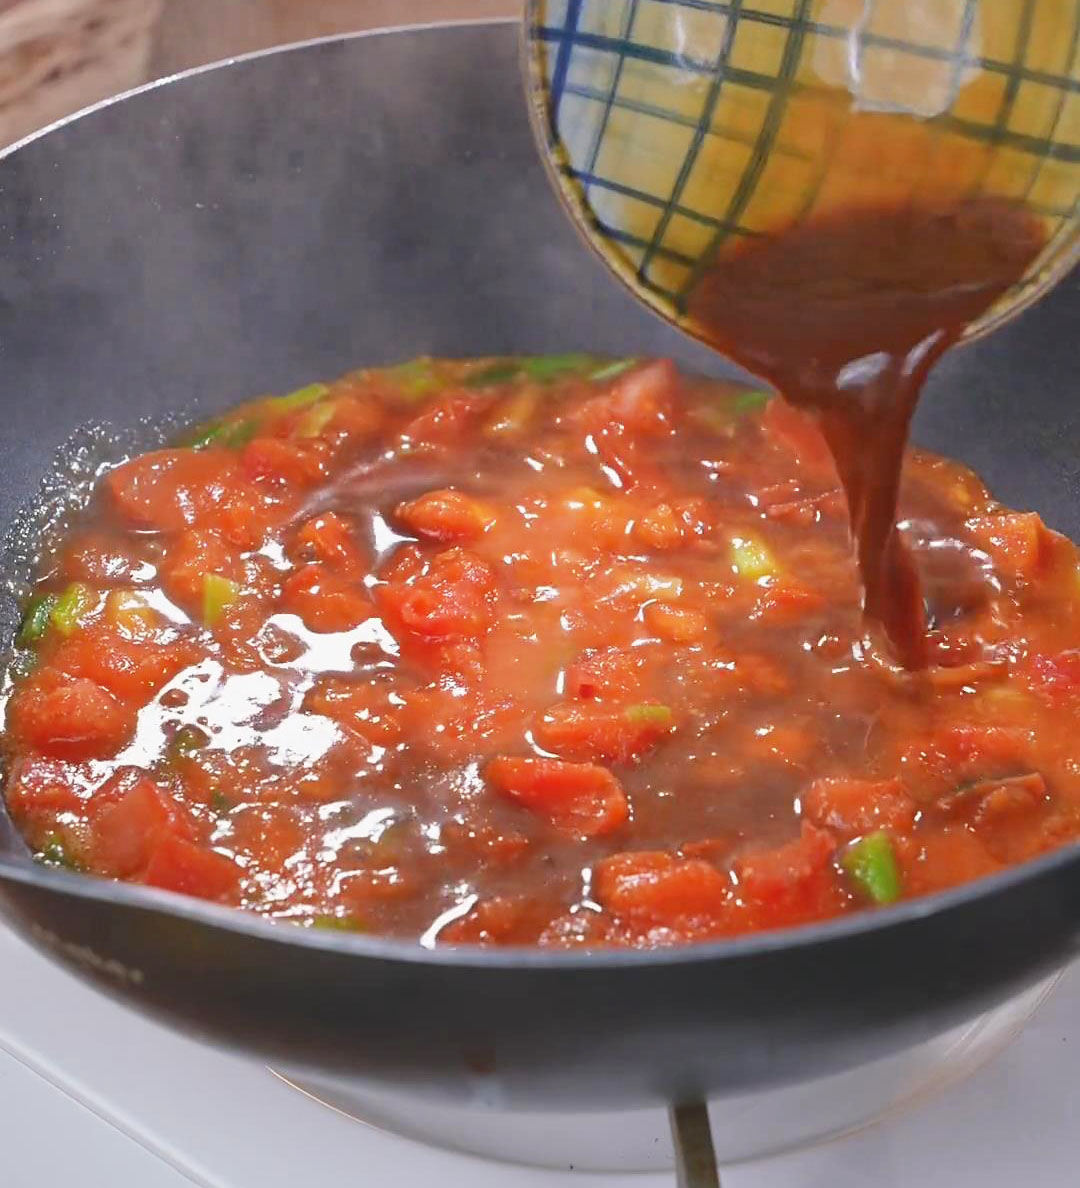 Mix the sauce once more and pour into the pan